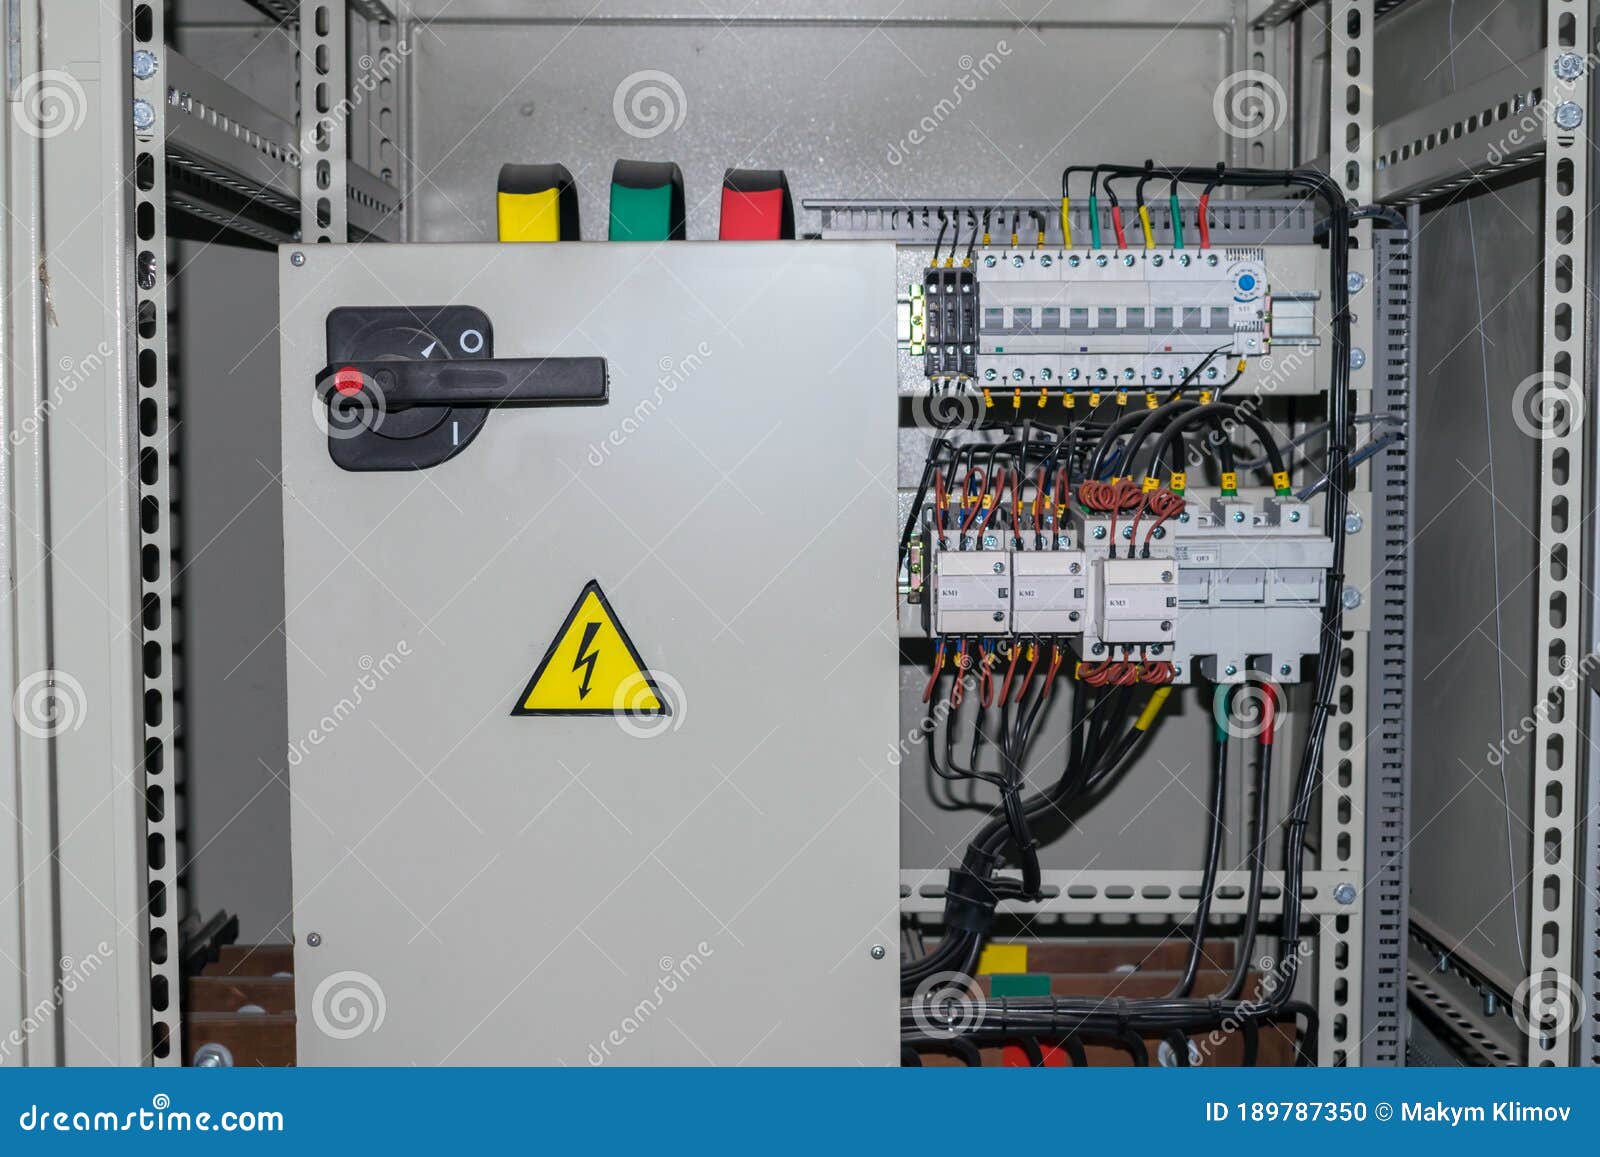 electrical cabinet containing a plurality of contacts and switches